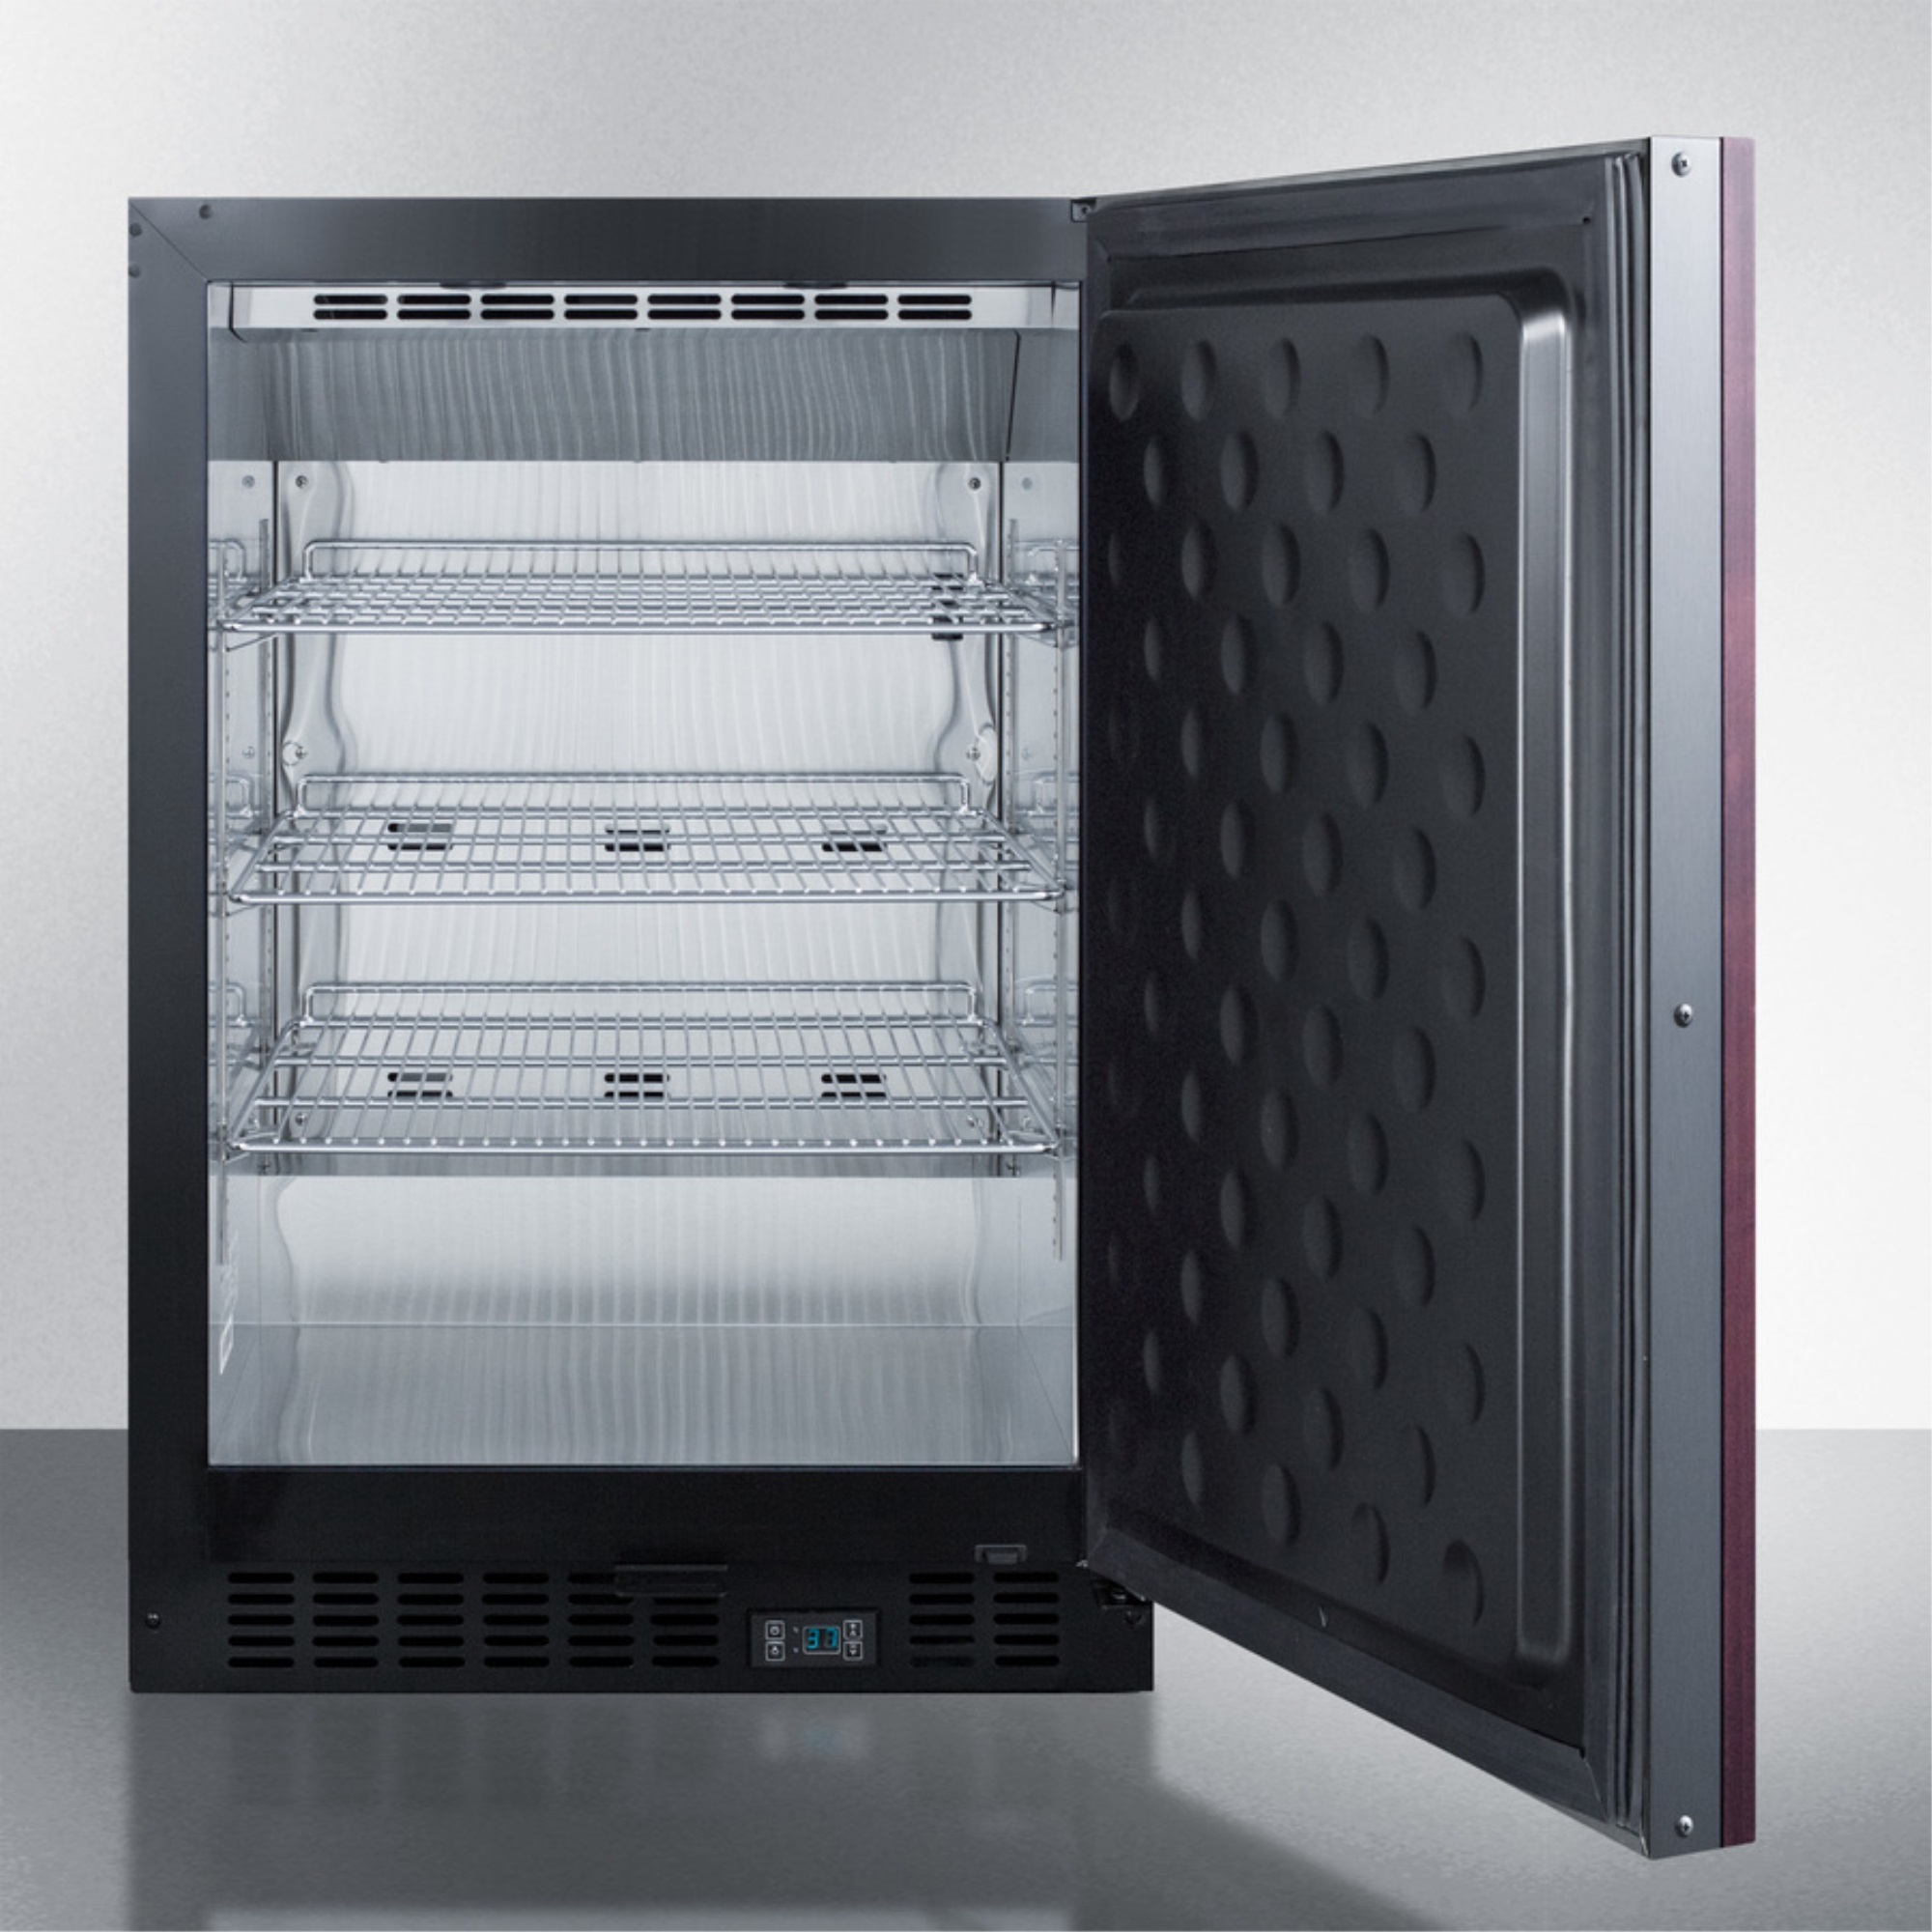 Summit Commercial Built-in undercounter commercial refrigerator with solid panel-ready door and SS interior